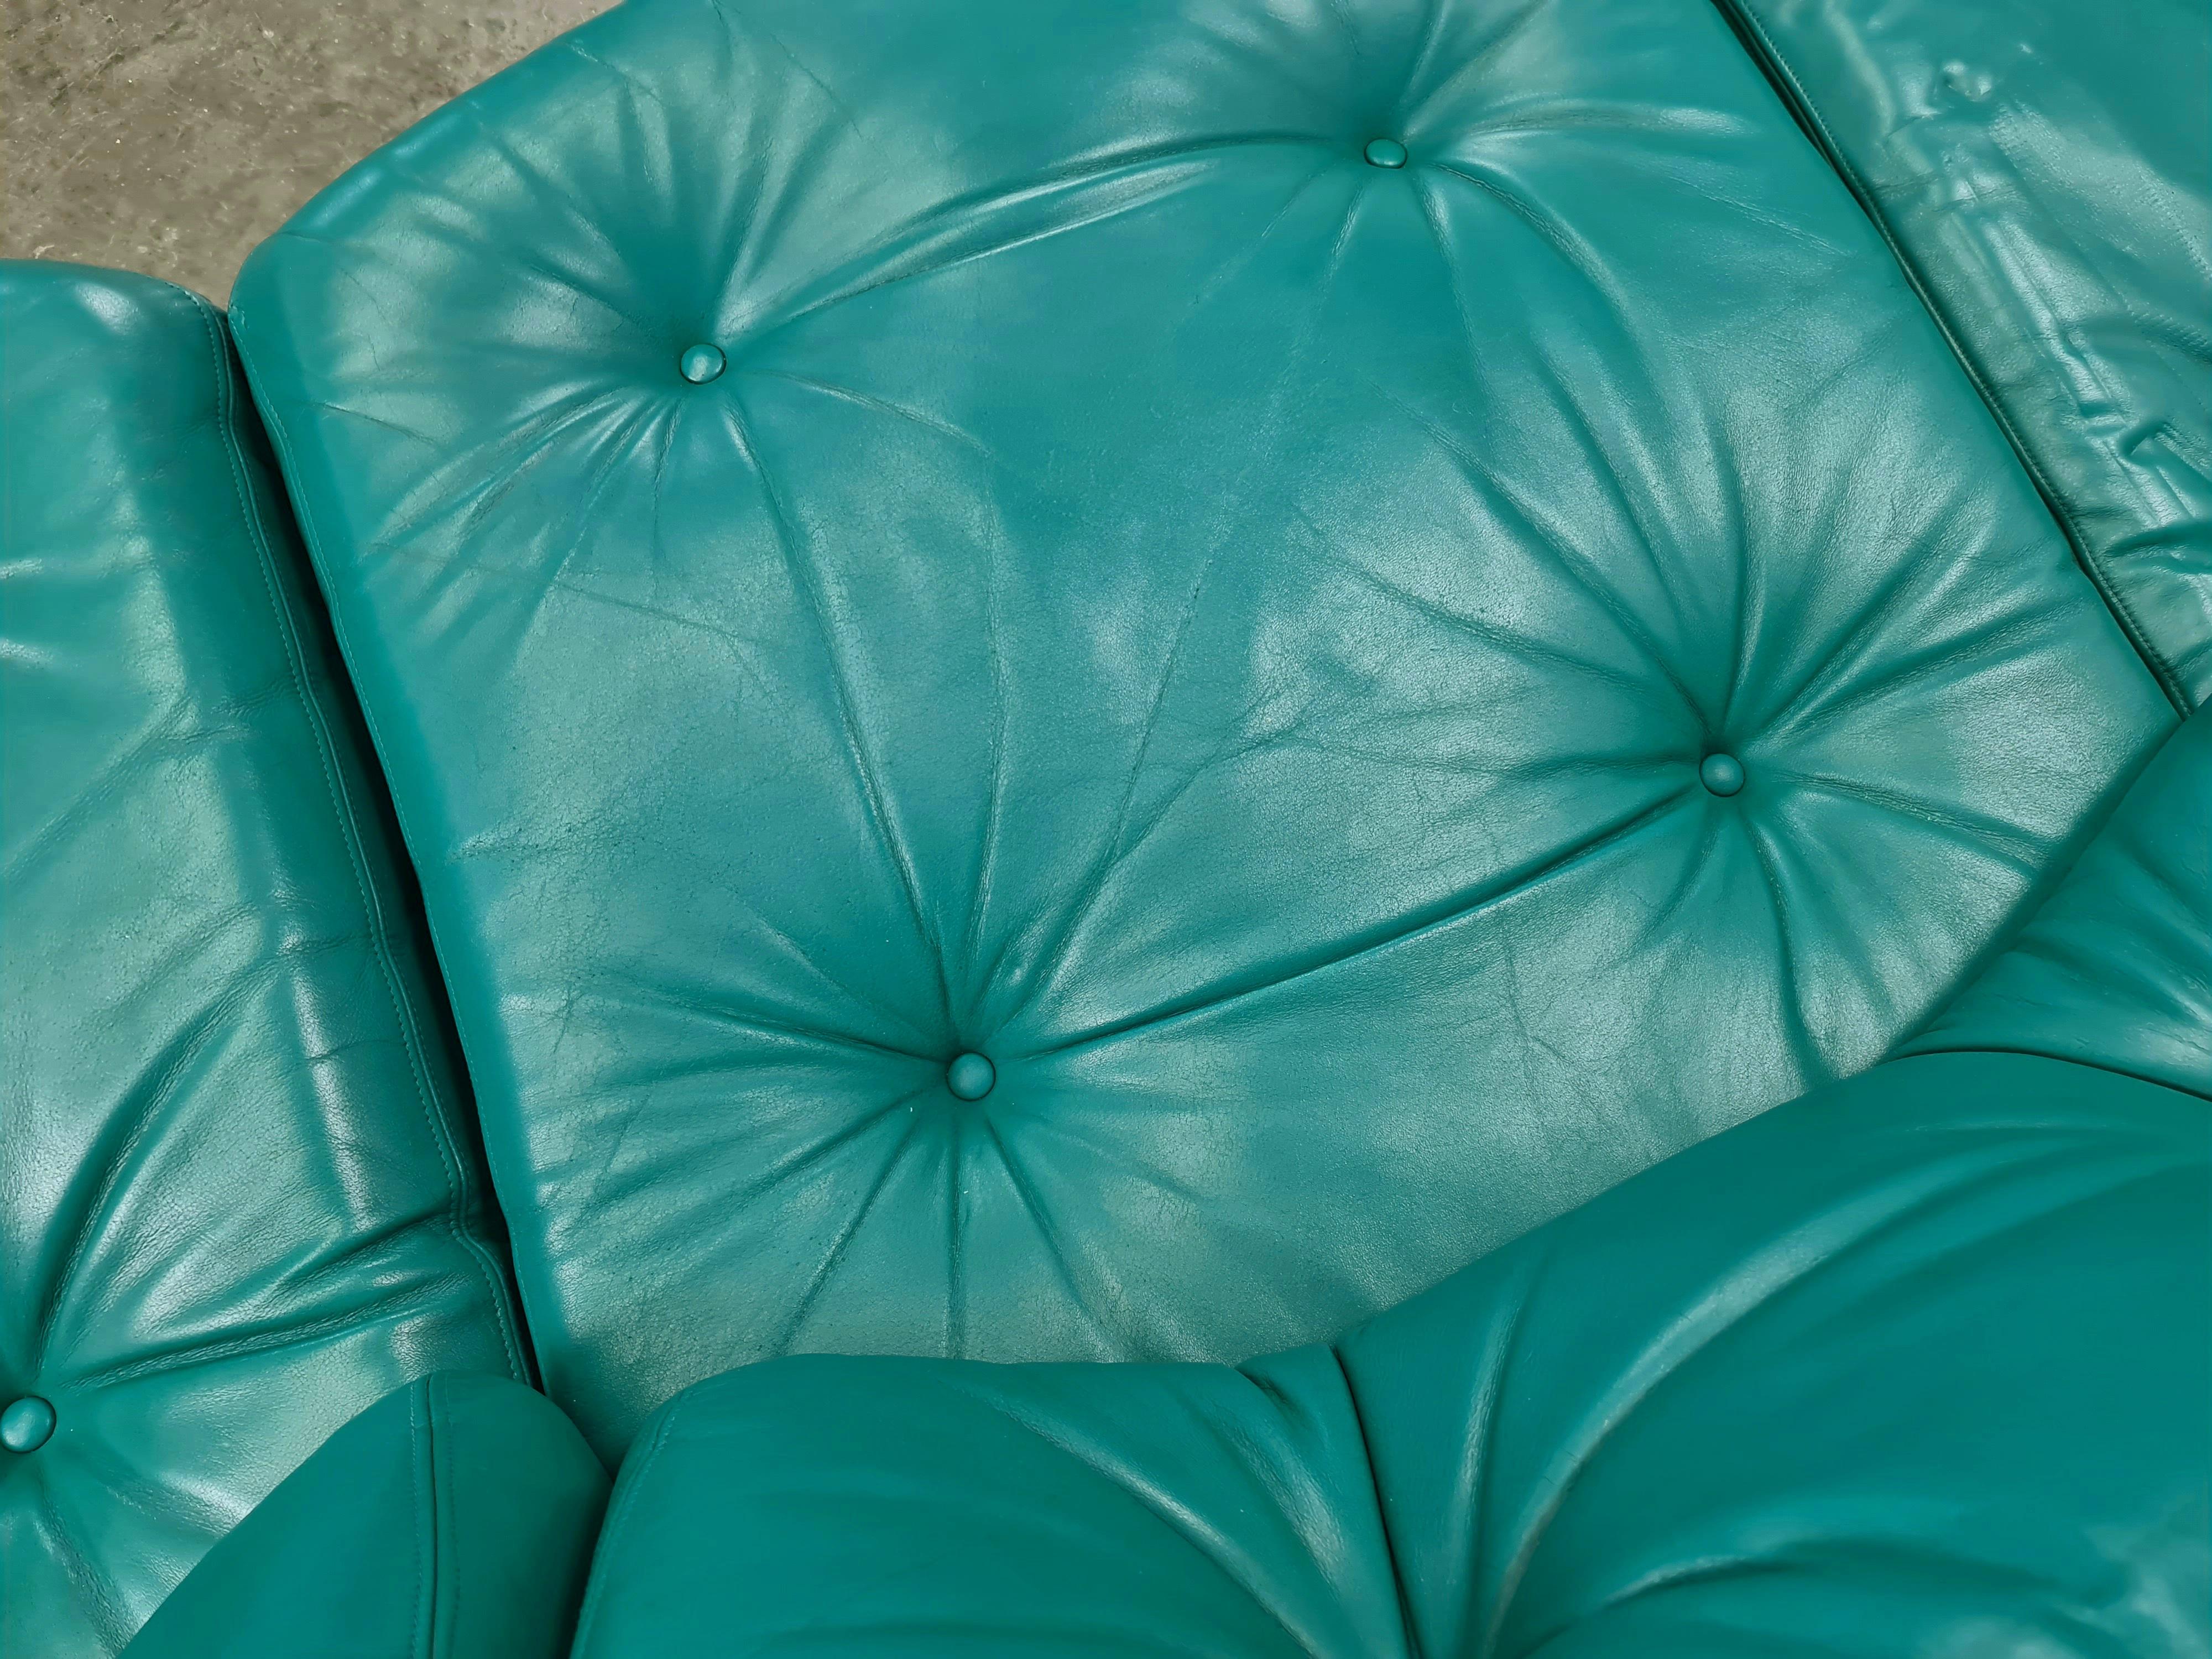 Fehlbaum Vitra Prototype Sectional Sofa Designed by Peter Ghyczy 1